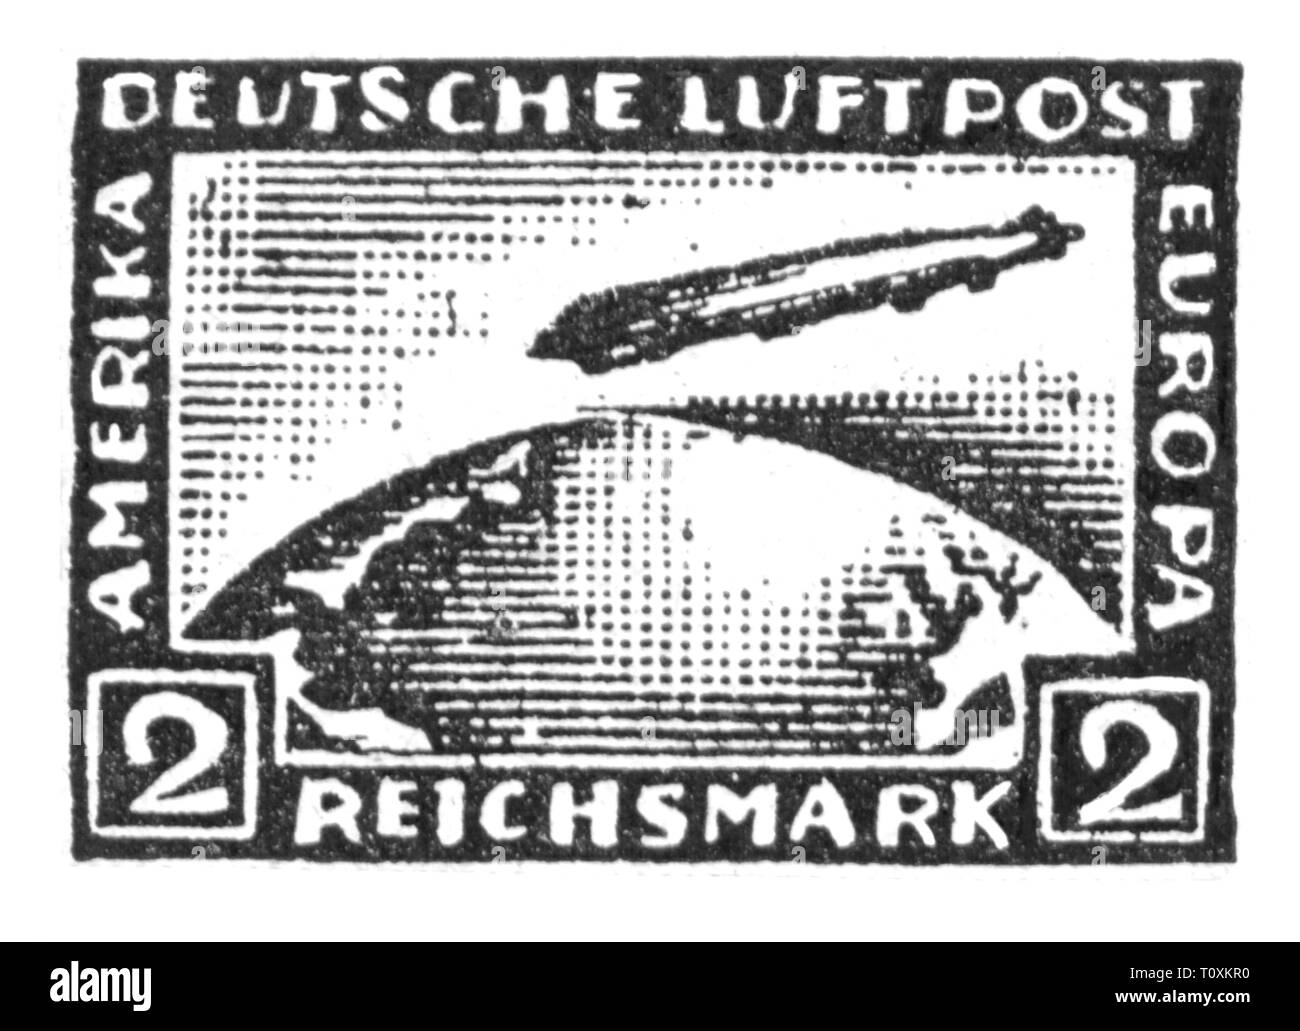 mail, postage stamps, Germany, German Reichspost (Reich Mail), 2 reichsmark postage stamp, German airmail, 1931, Additional-Rights-Clearance-Info-Not-Available Stock Photo